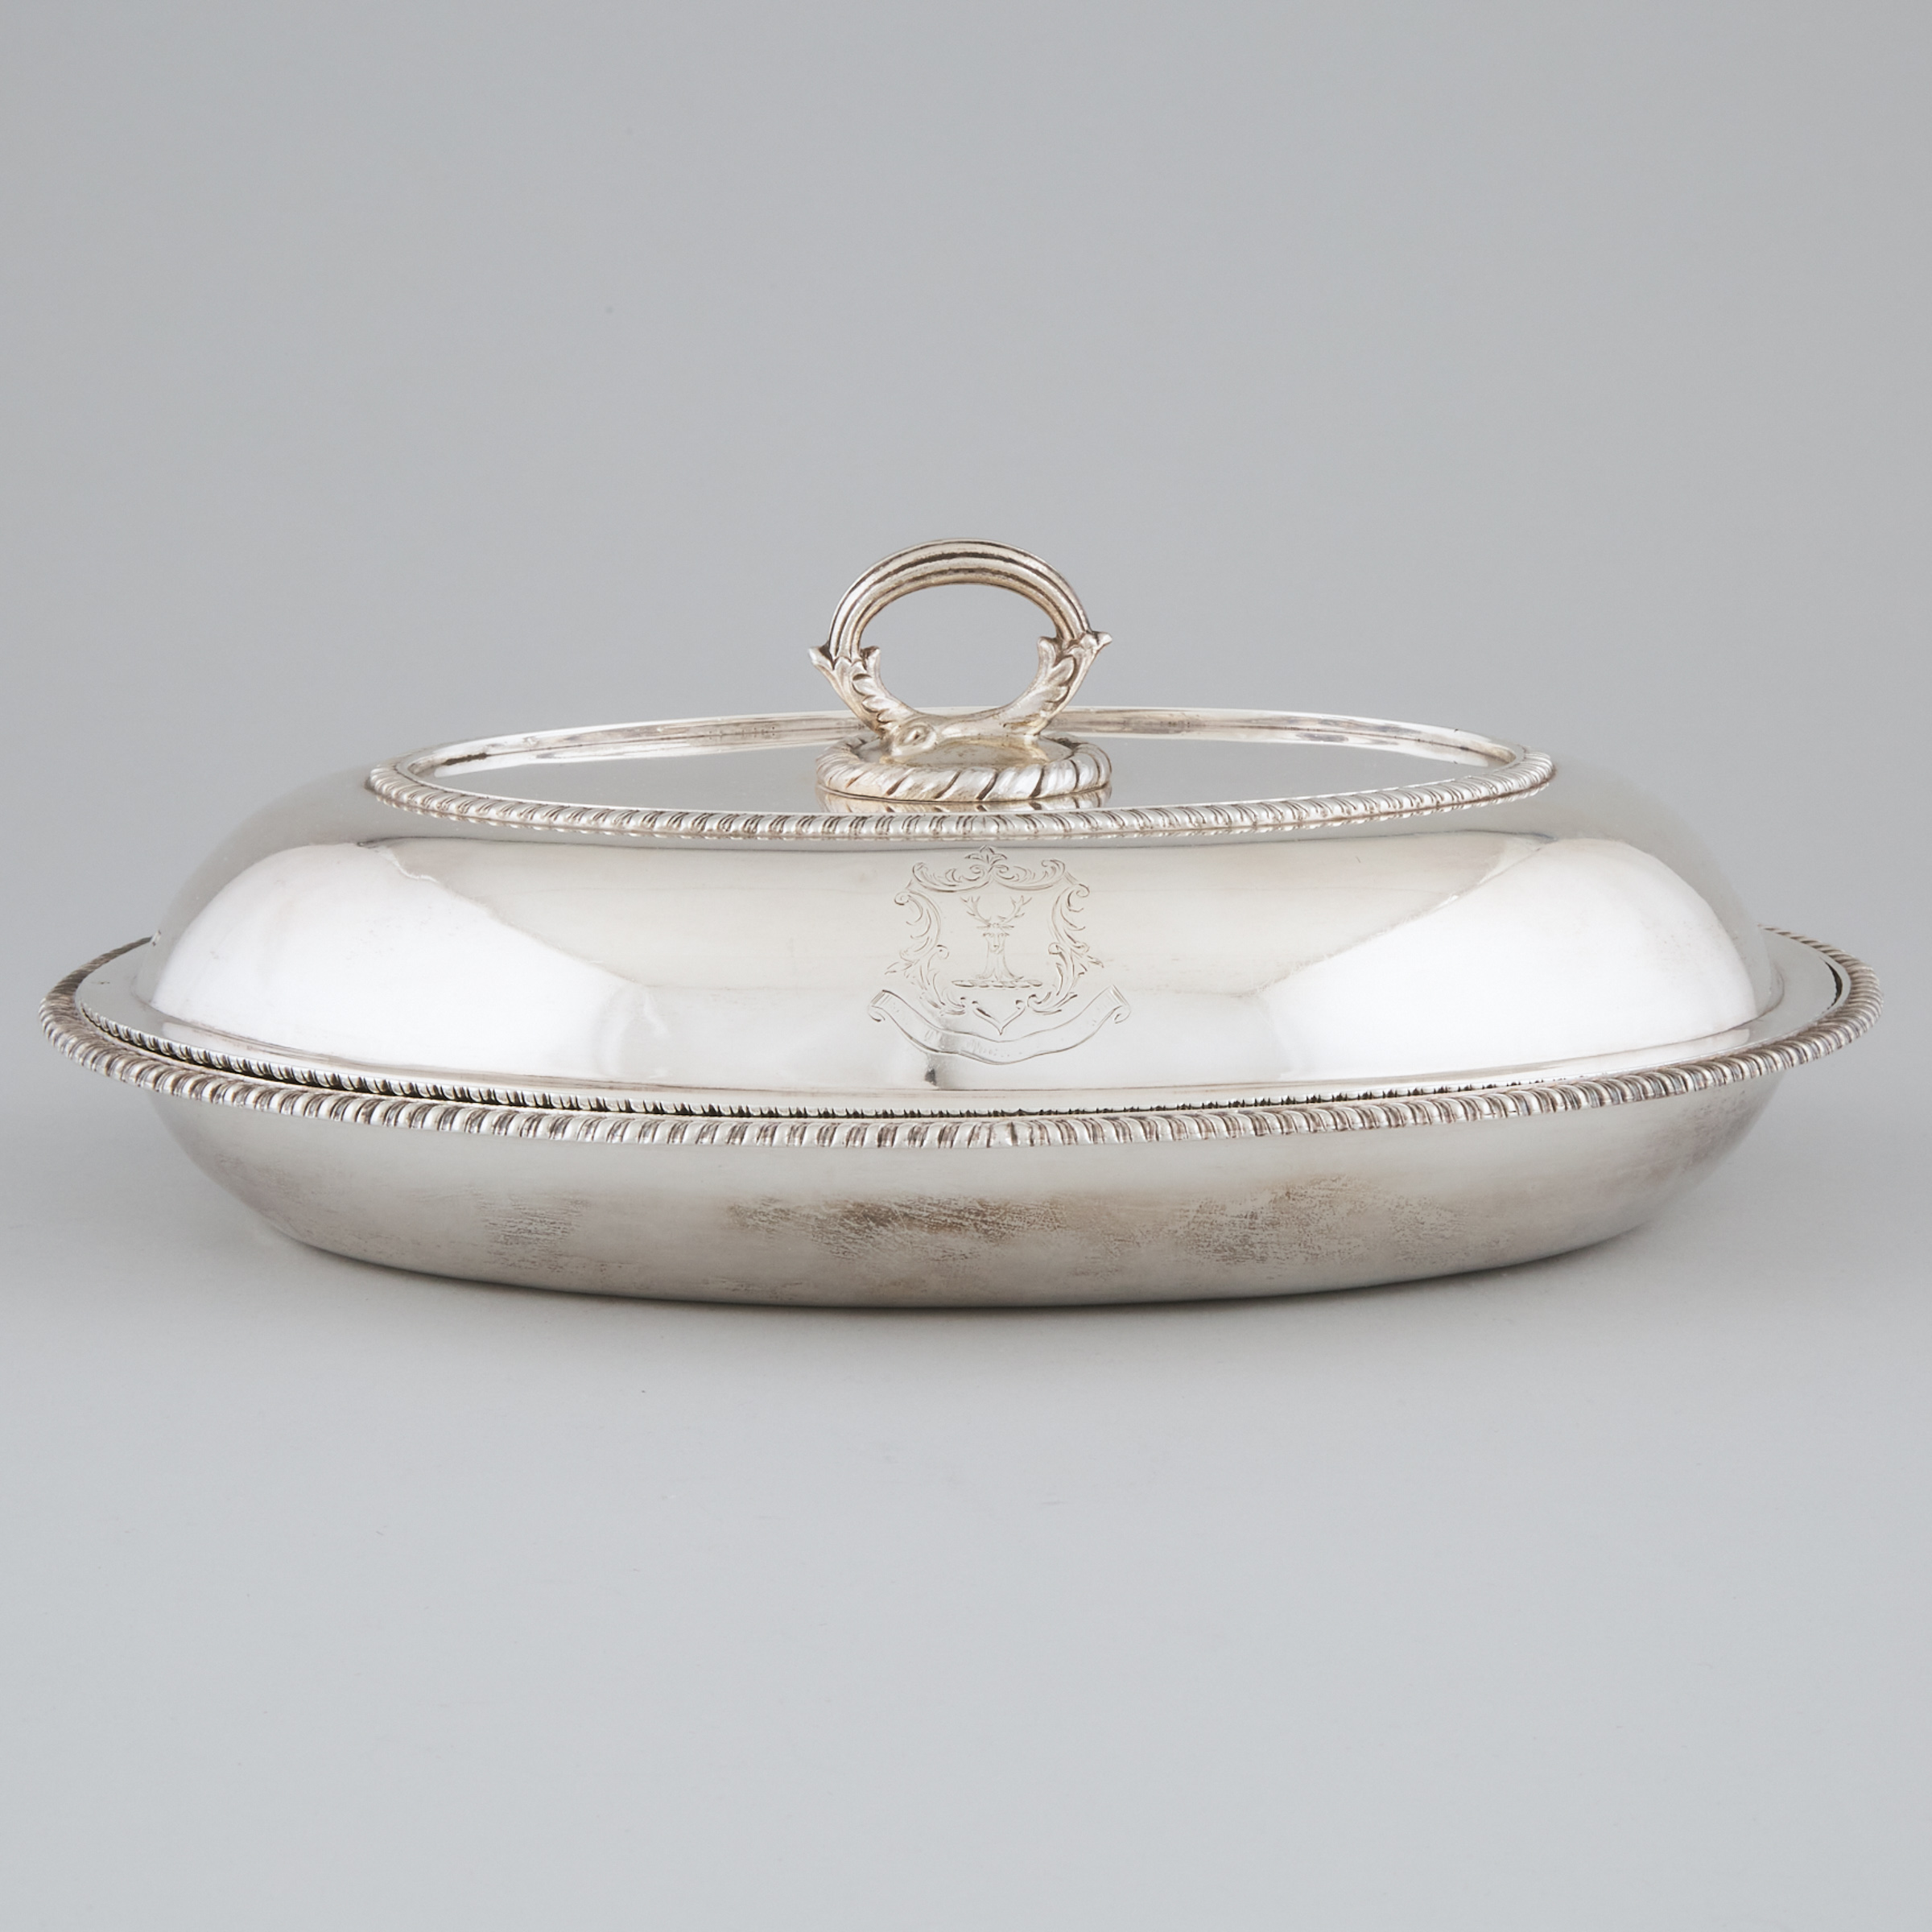 William IV Silver Oval Entrée Dish and Cover, William Ker Reid, London, 1833